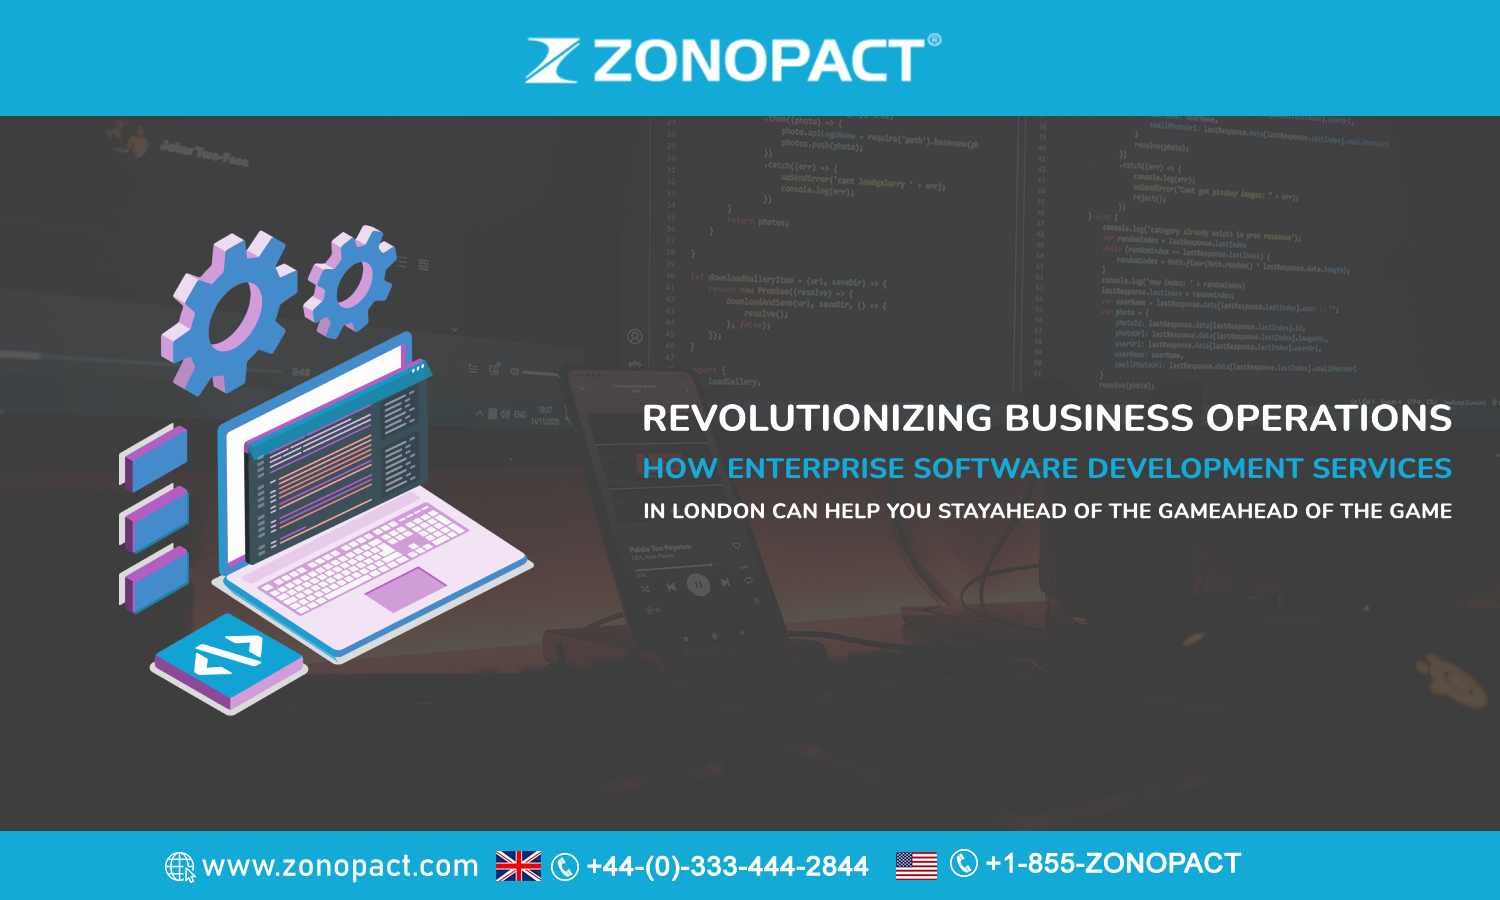 Revolutionizing Business Operations How Enterprise Software Development Services in London Can Help You Stay